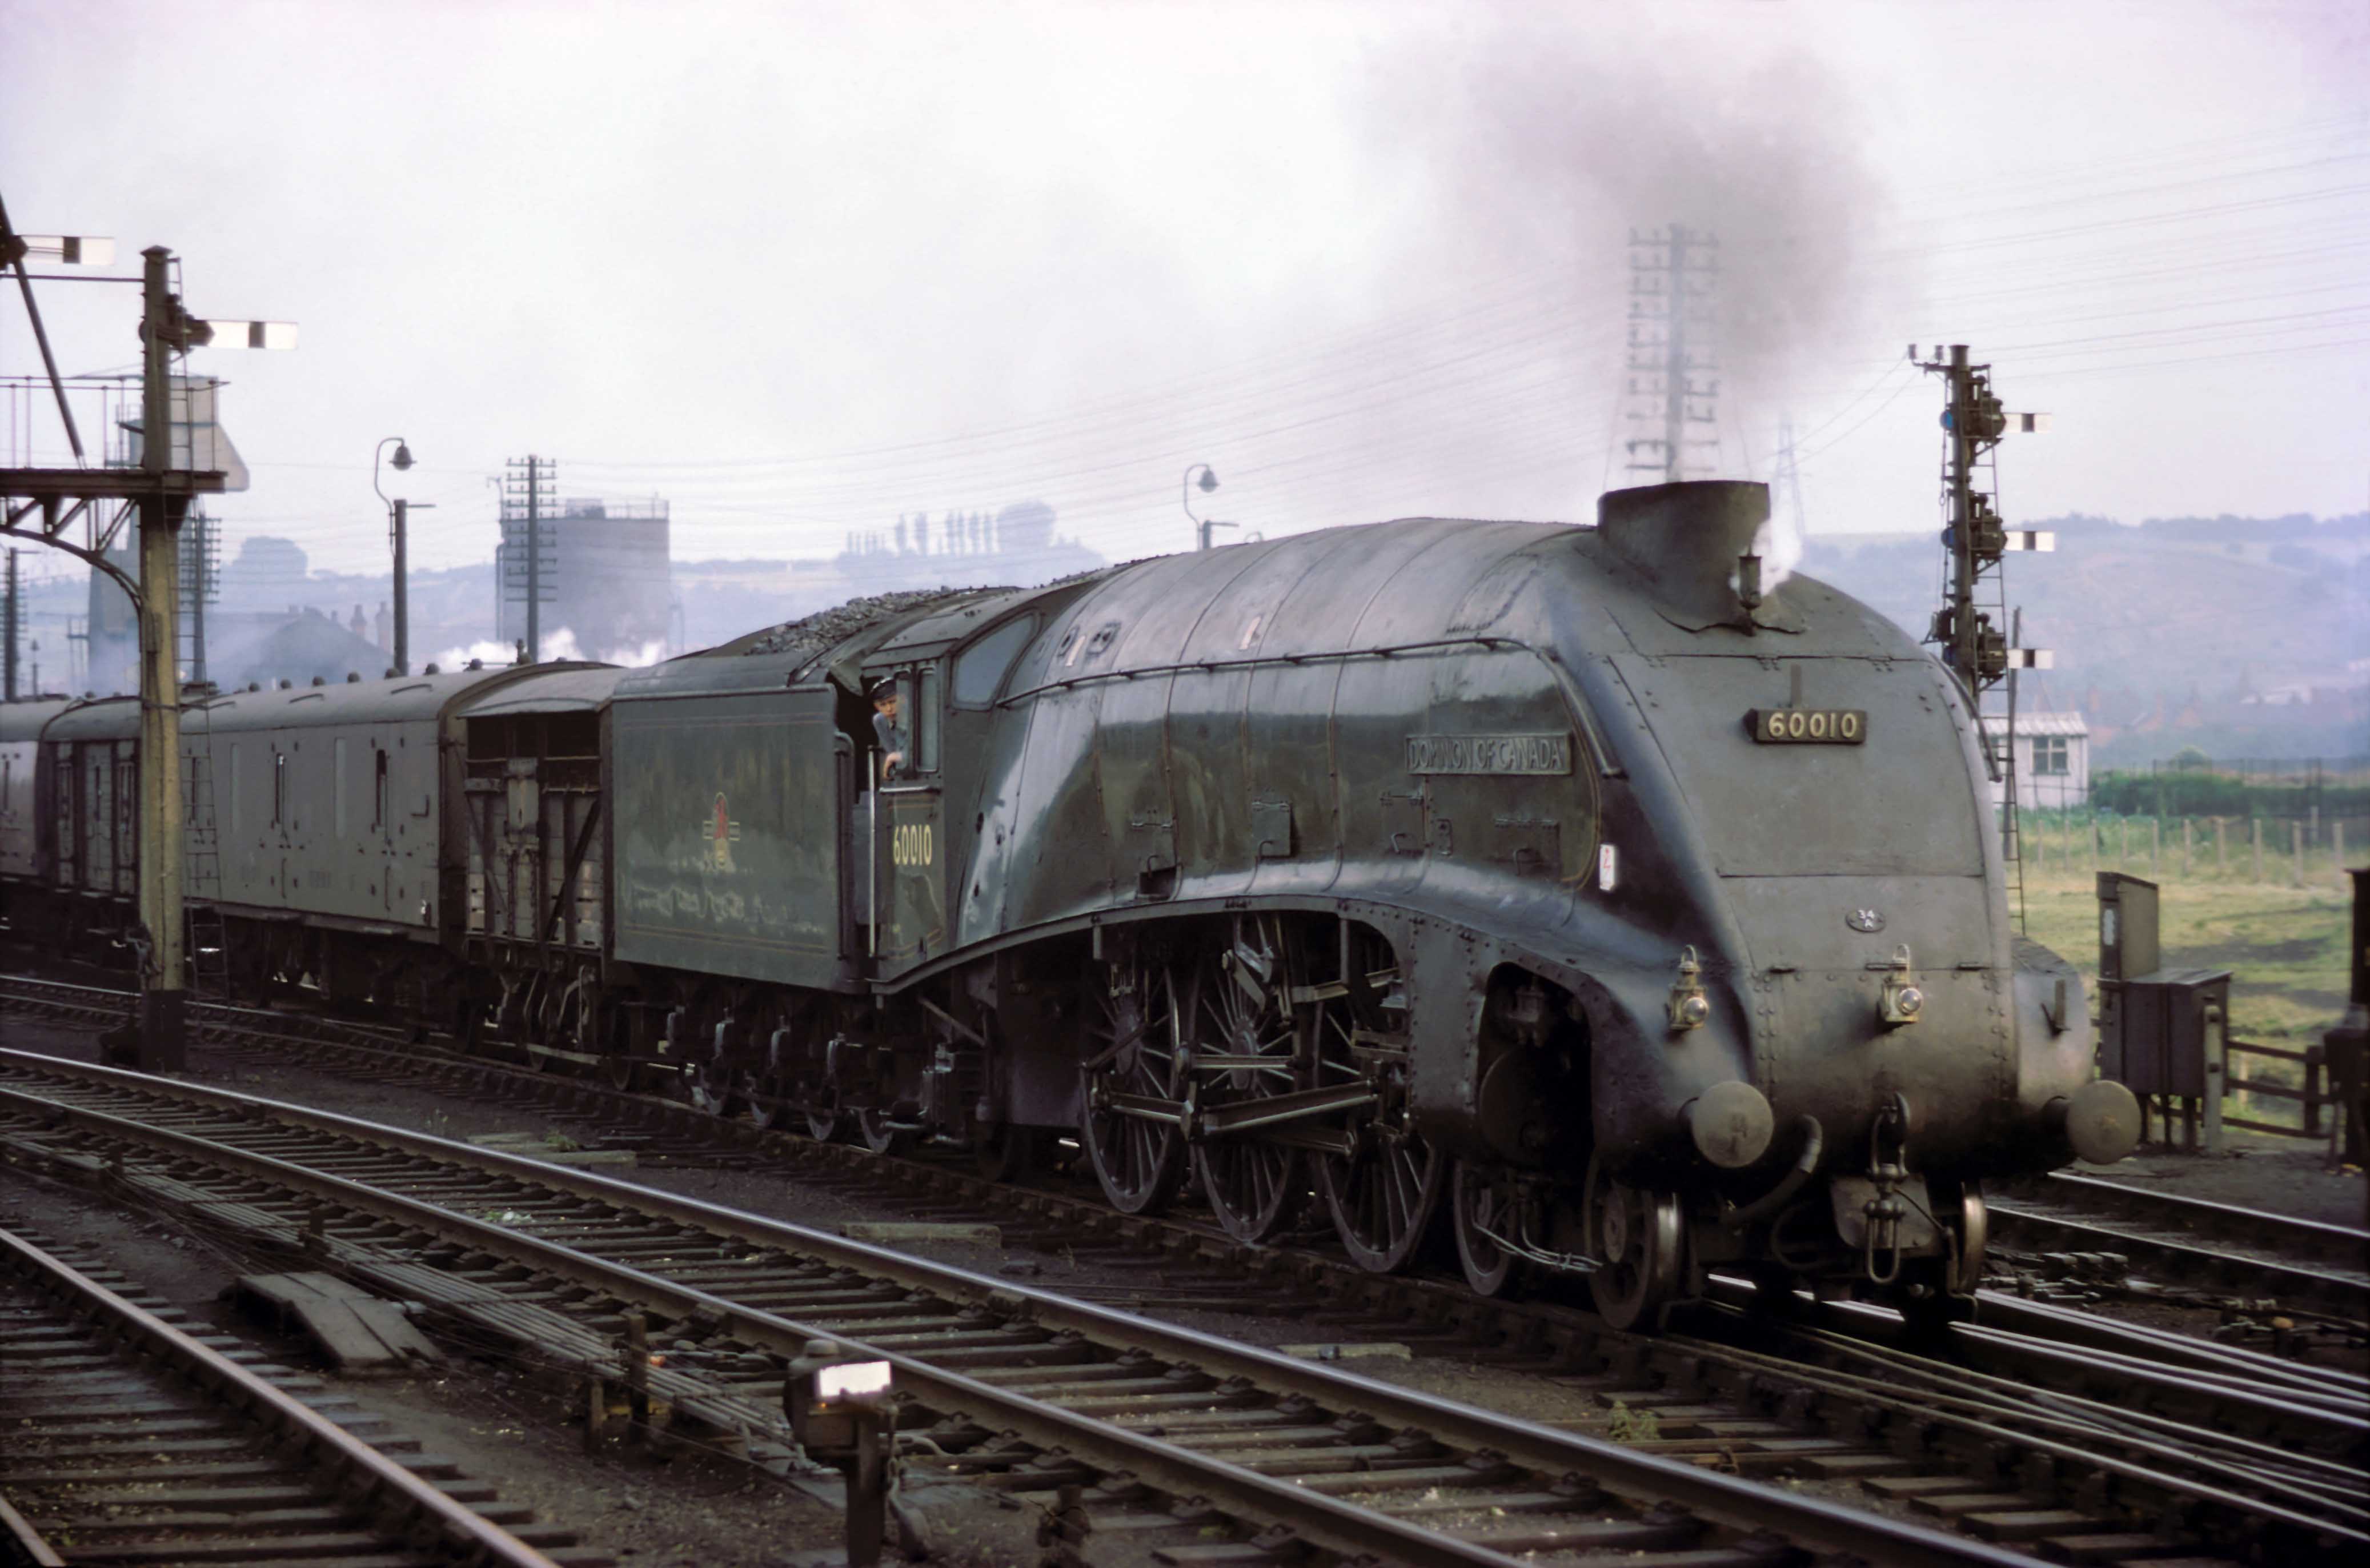 Class ‘A4’ locomotive No. 60010 Dominion of Canada has charge of a northbound fully fitted express freight train on 12th July 1962. It has paused on the Up & Down Goods line and sets off once more on its journey. Photograph by Cedric A. Clayson, © John Clayson